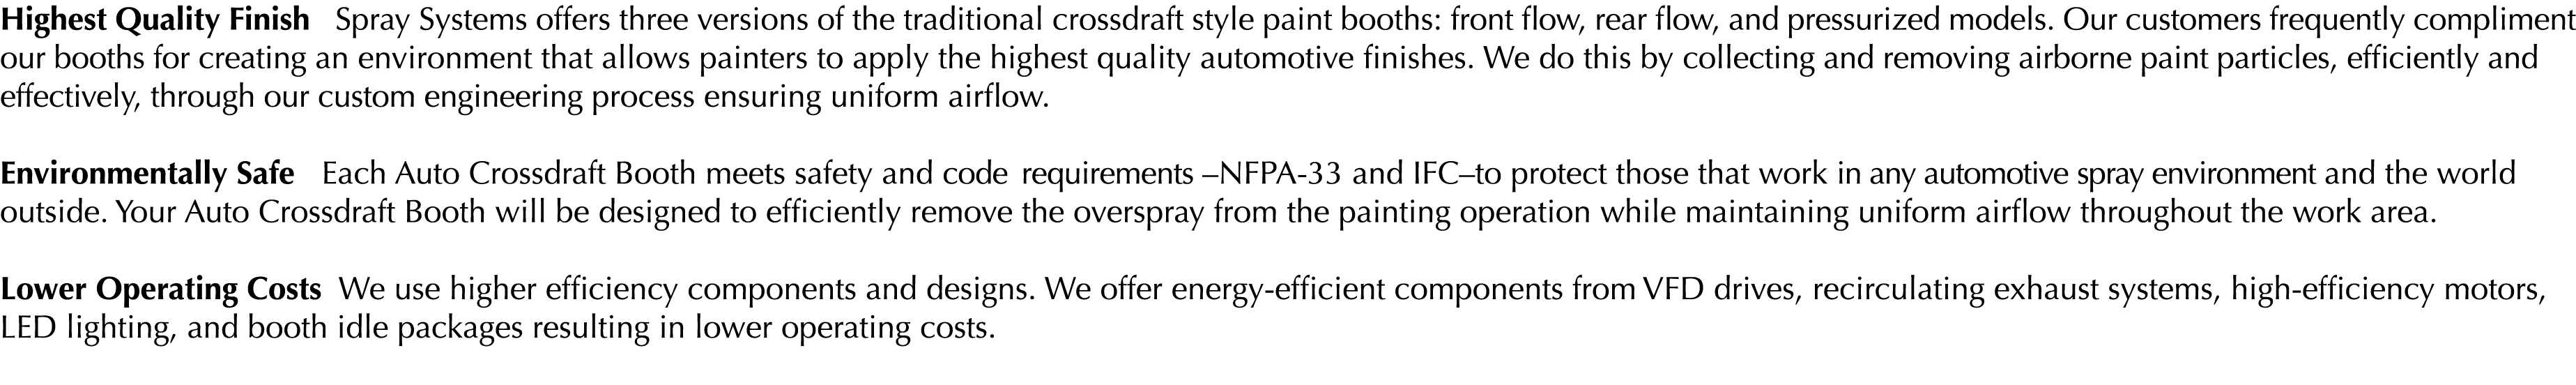 Highest Quality Finish  Spray Systems offers three versions of the traditional crossdraft style paint booths: front f   